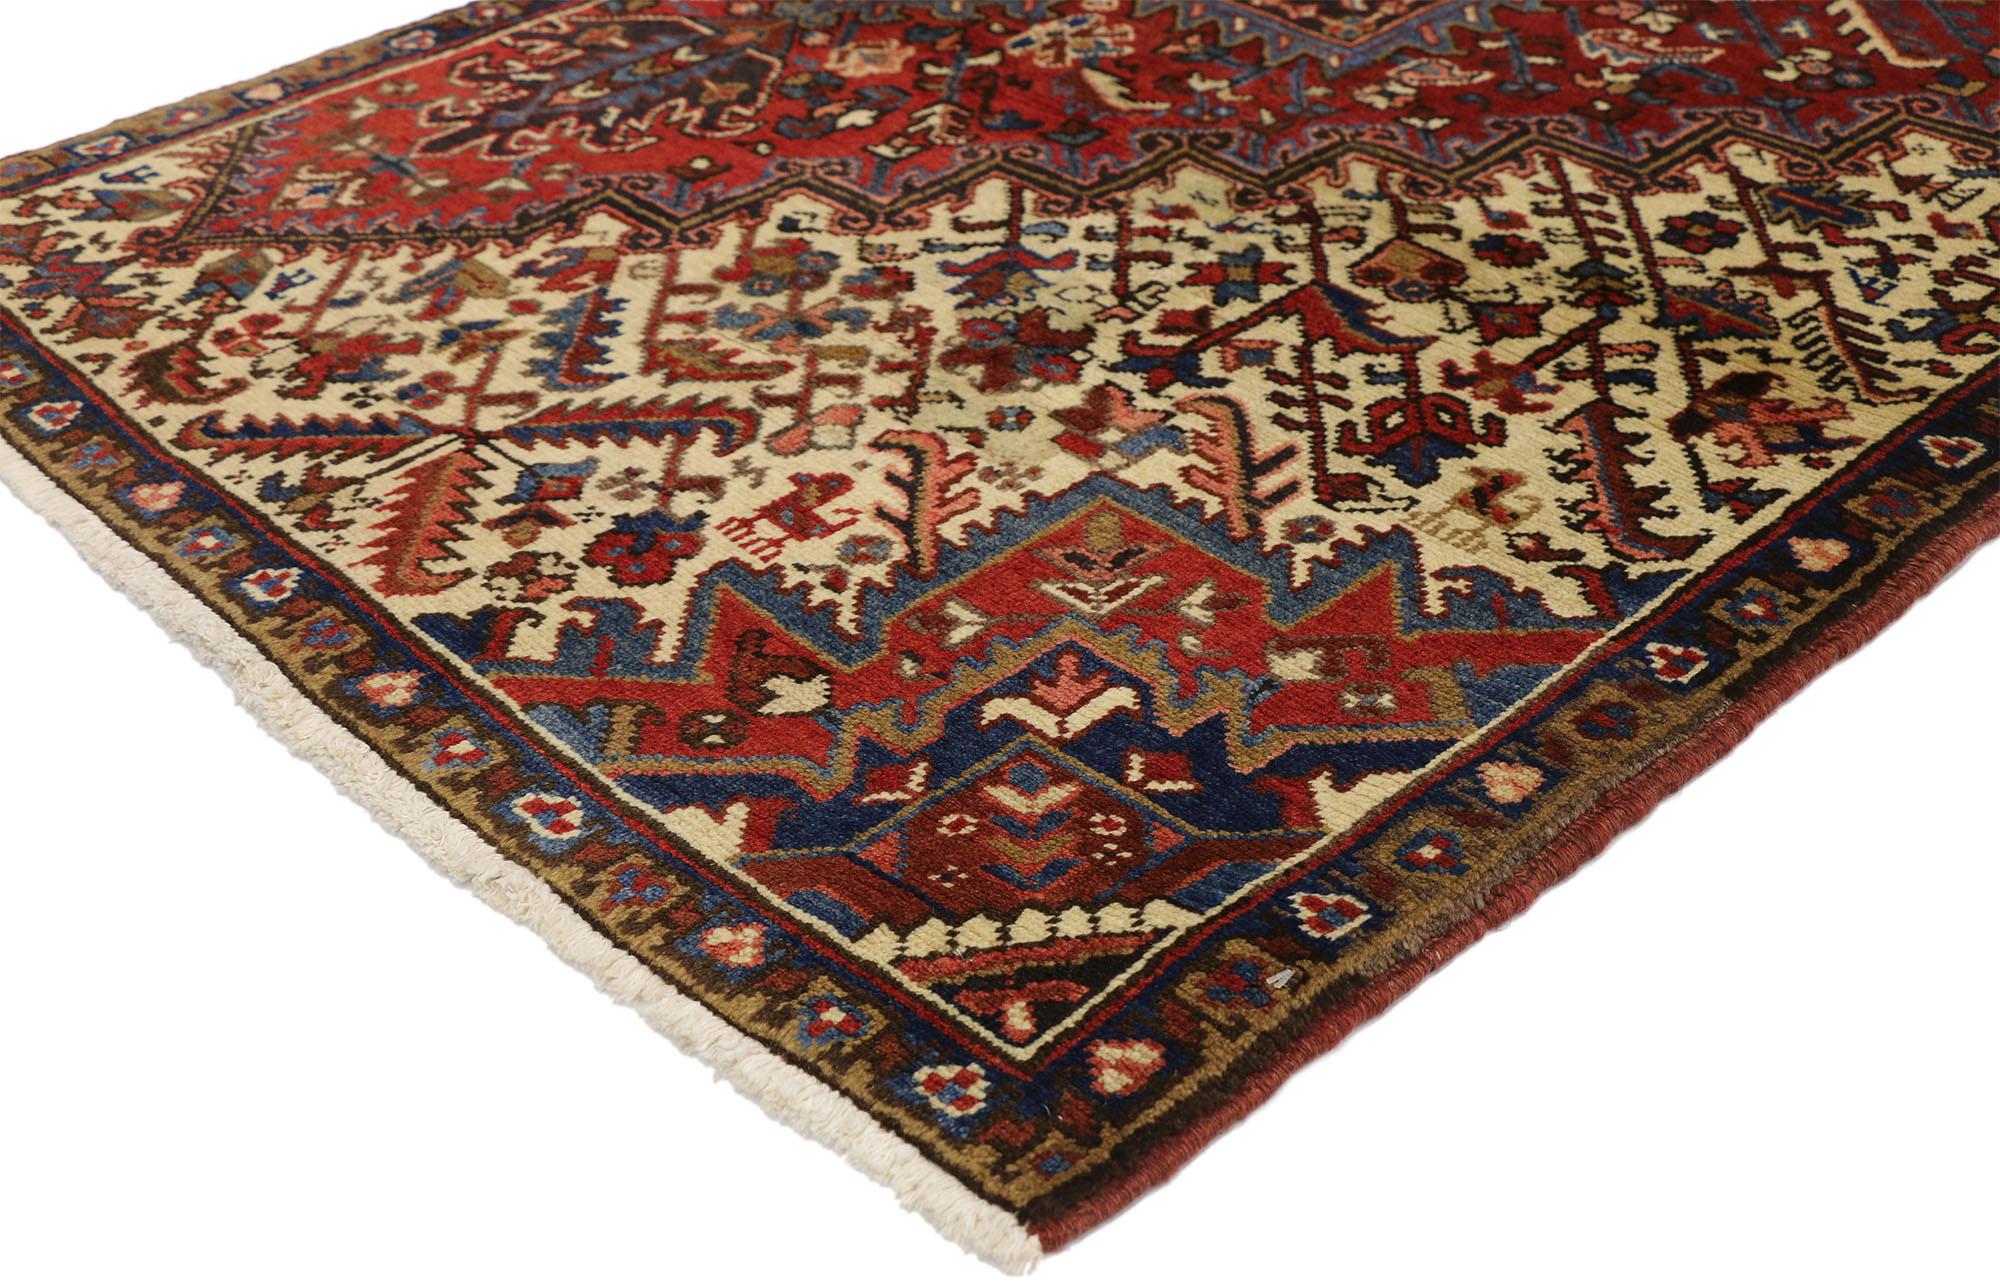 76428 Vintage Persian Heriz Rug with Traditional Modern Style, Wagireh Rug 03'03 x 04'01. This hand-knotted wool vintage Persian Heriz rug features a traditional modern style; however, it was created to show the variations in Persian designs, colors